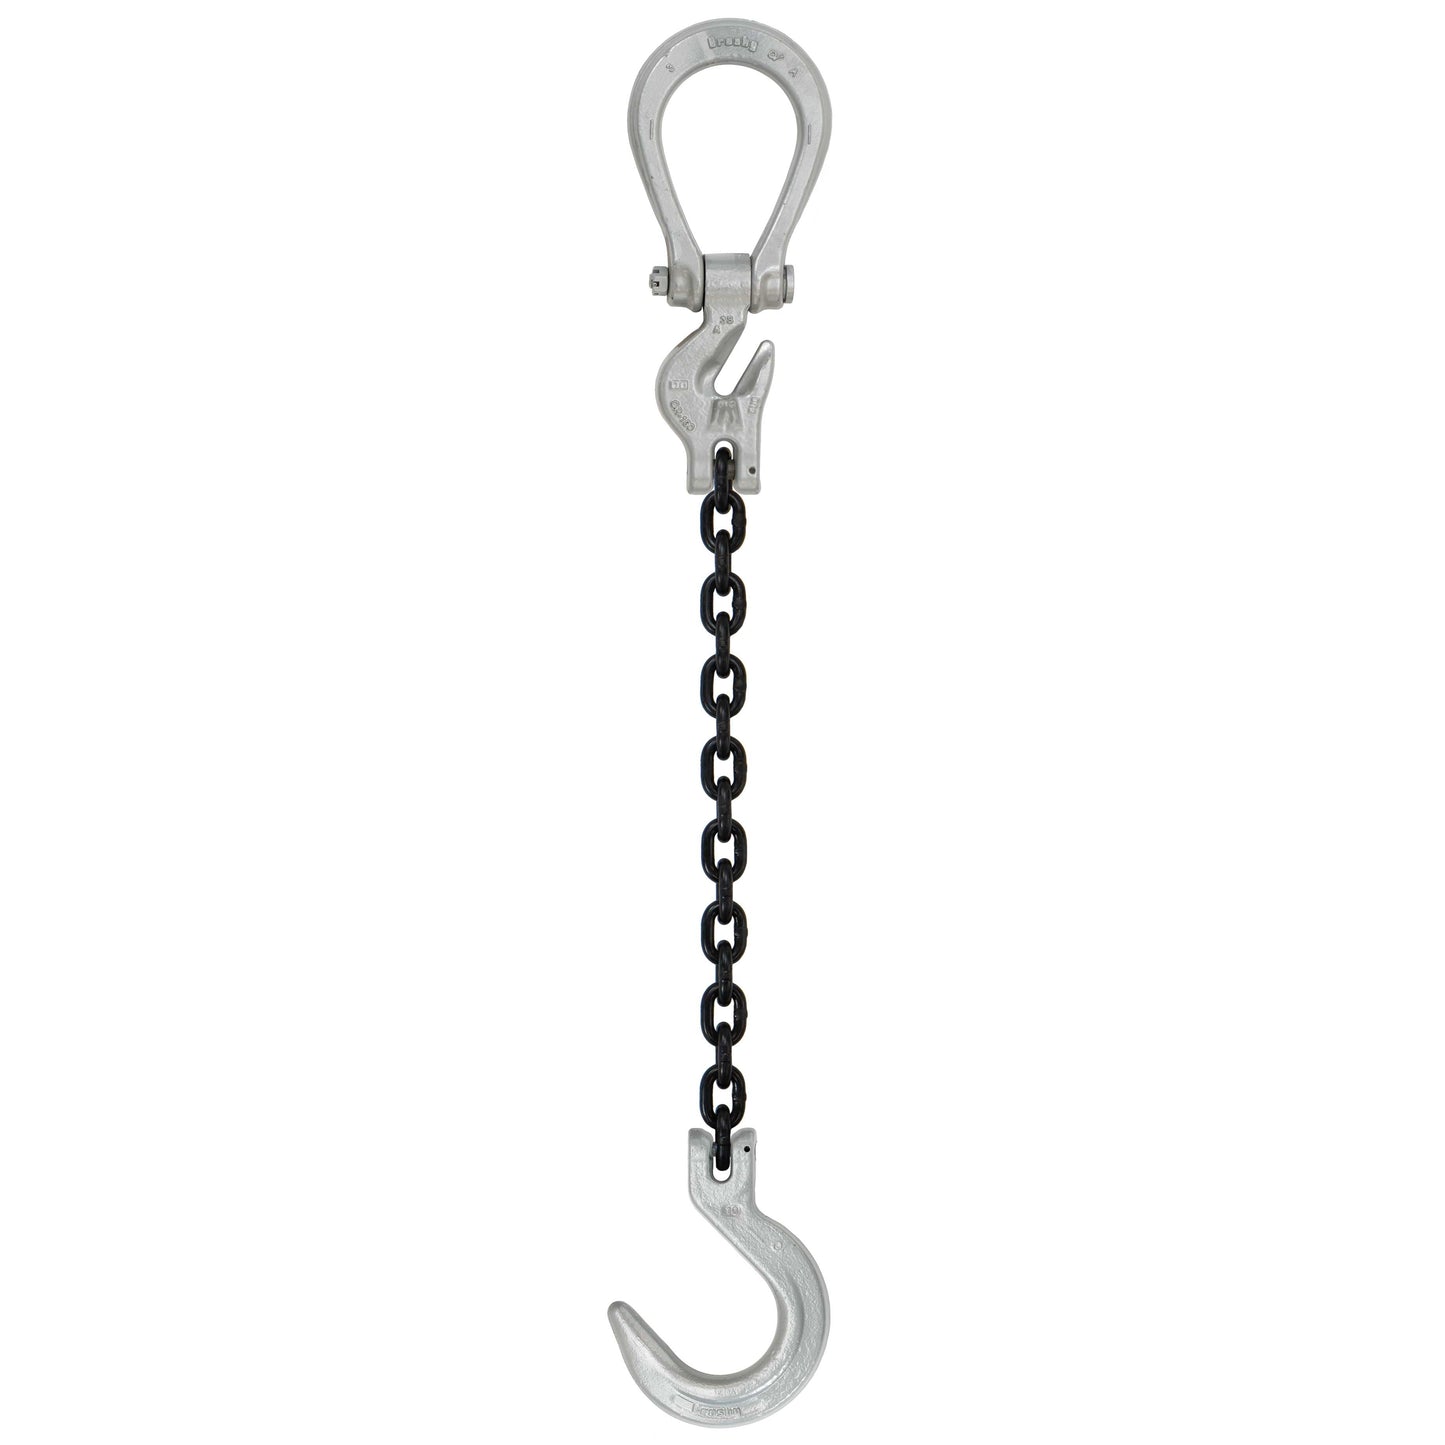 932 inch x 5 foot Domestic Adjustable Single Leg Chain Sling w Crosby Foundry Hook Grade 100 image 1 of 2